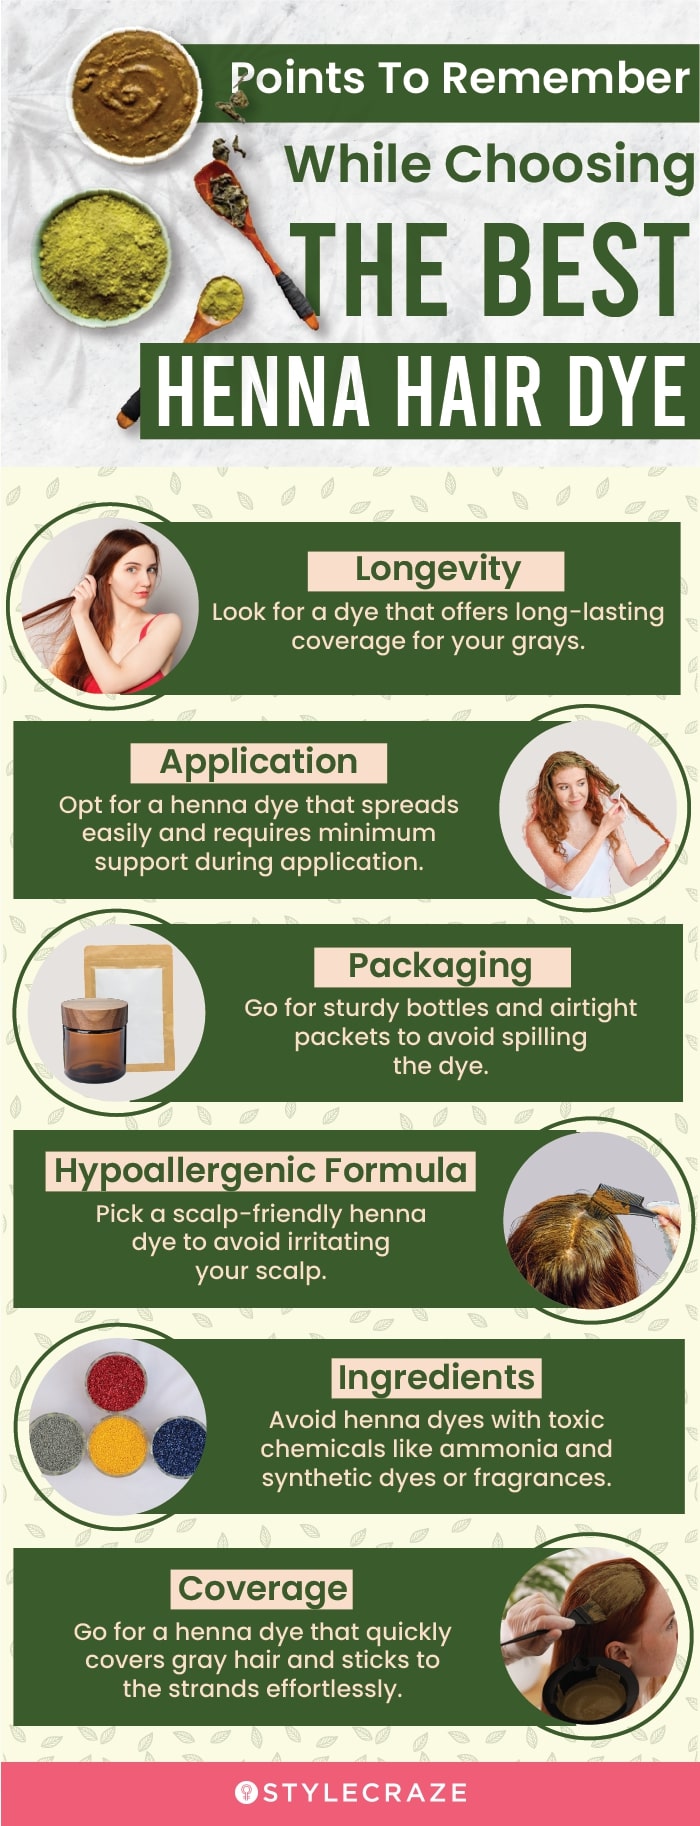 Points To Remember When Choosing The Best Henna Hair Dye (infographic)